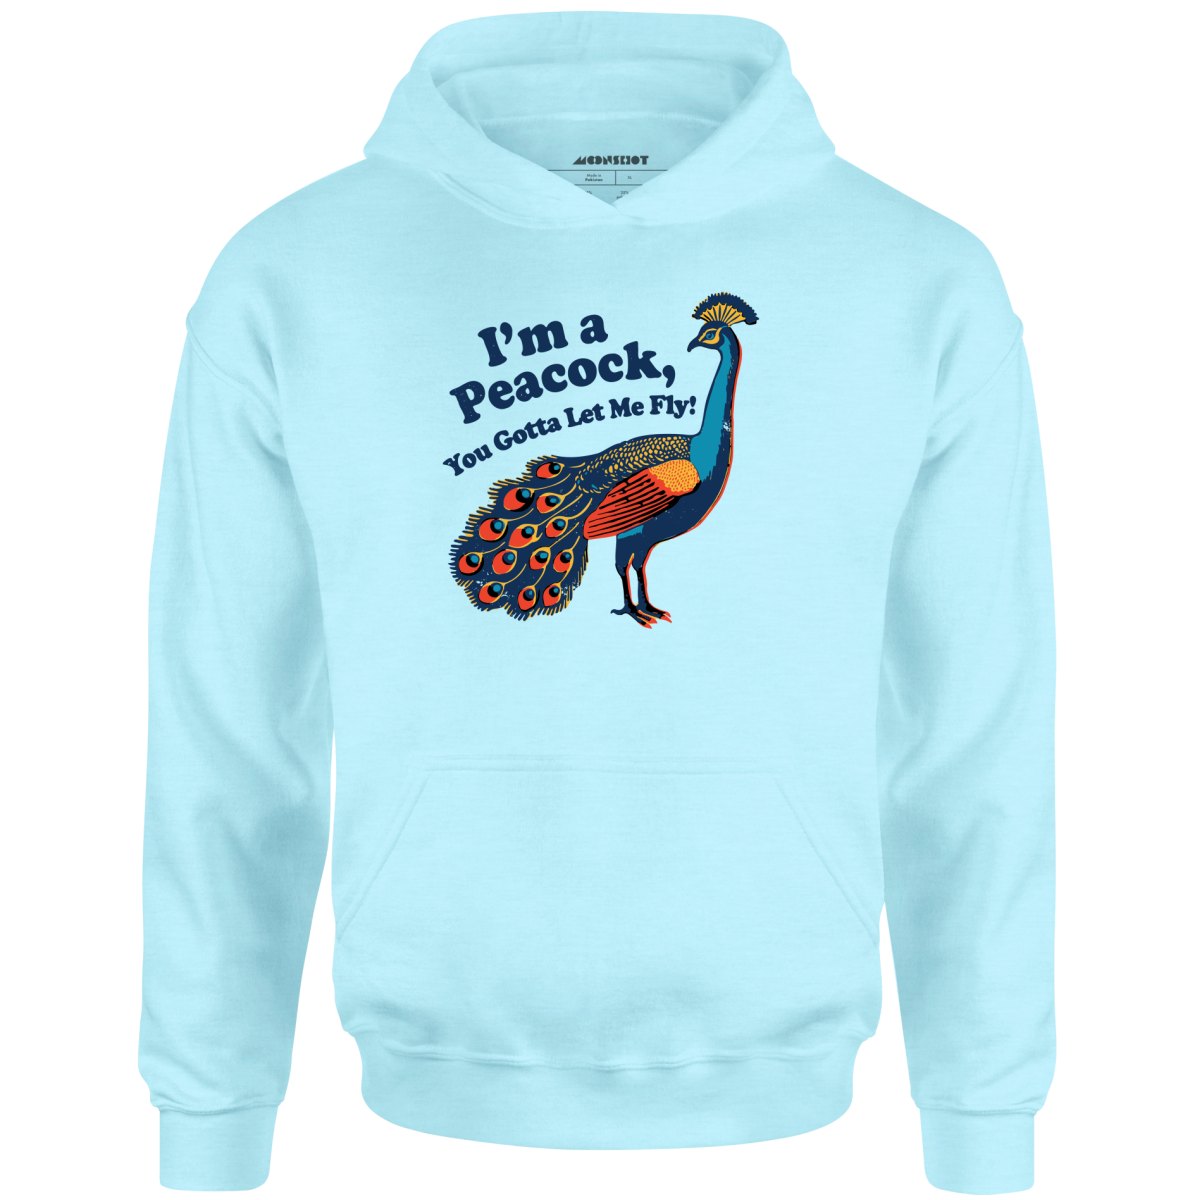 I'm a Peacock You Gotta Let Me Fly - Unisex Hoodie